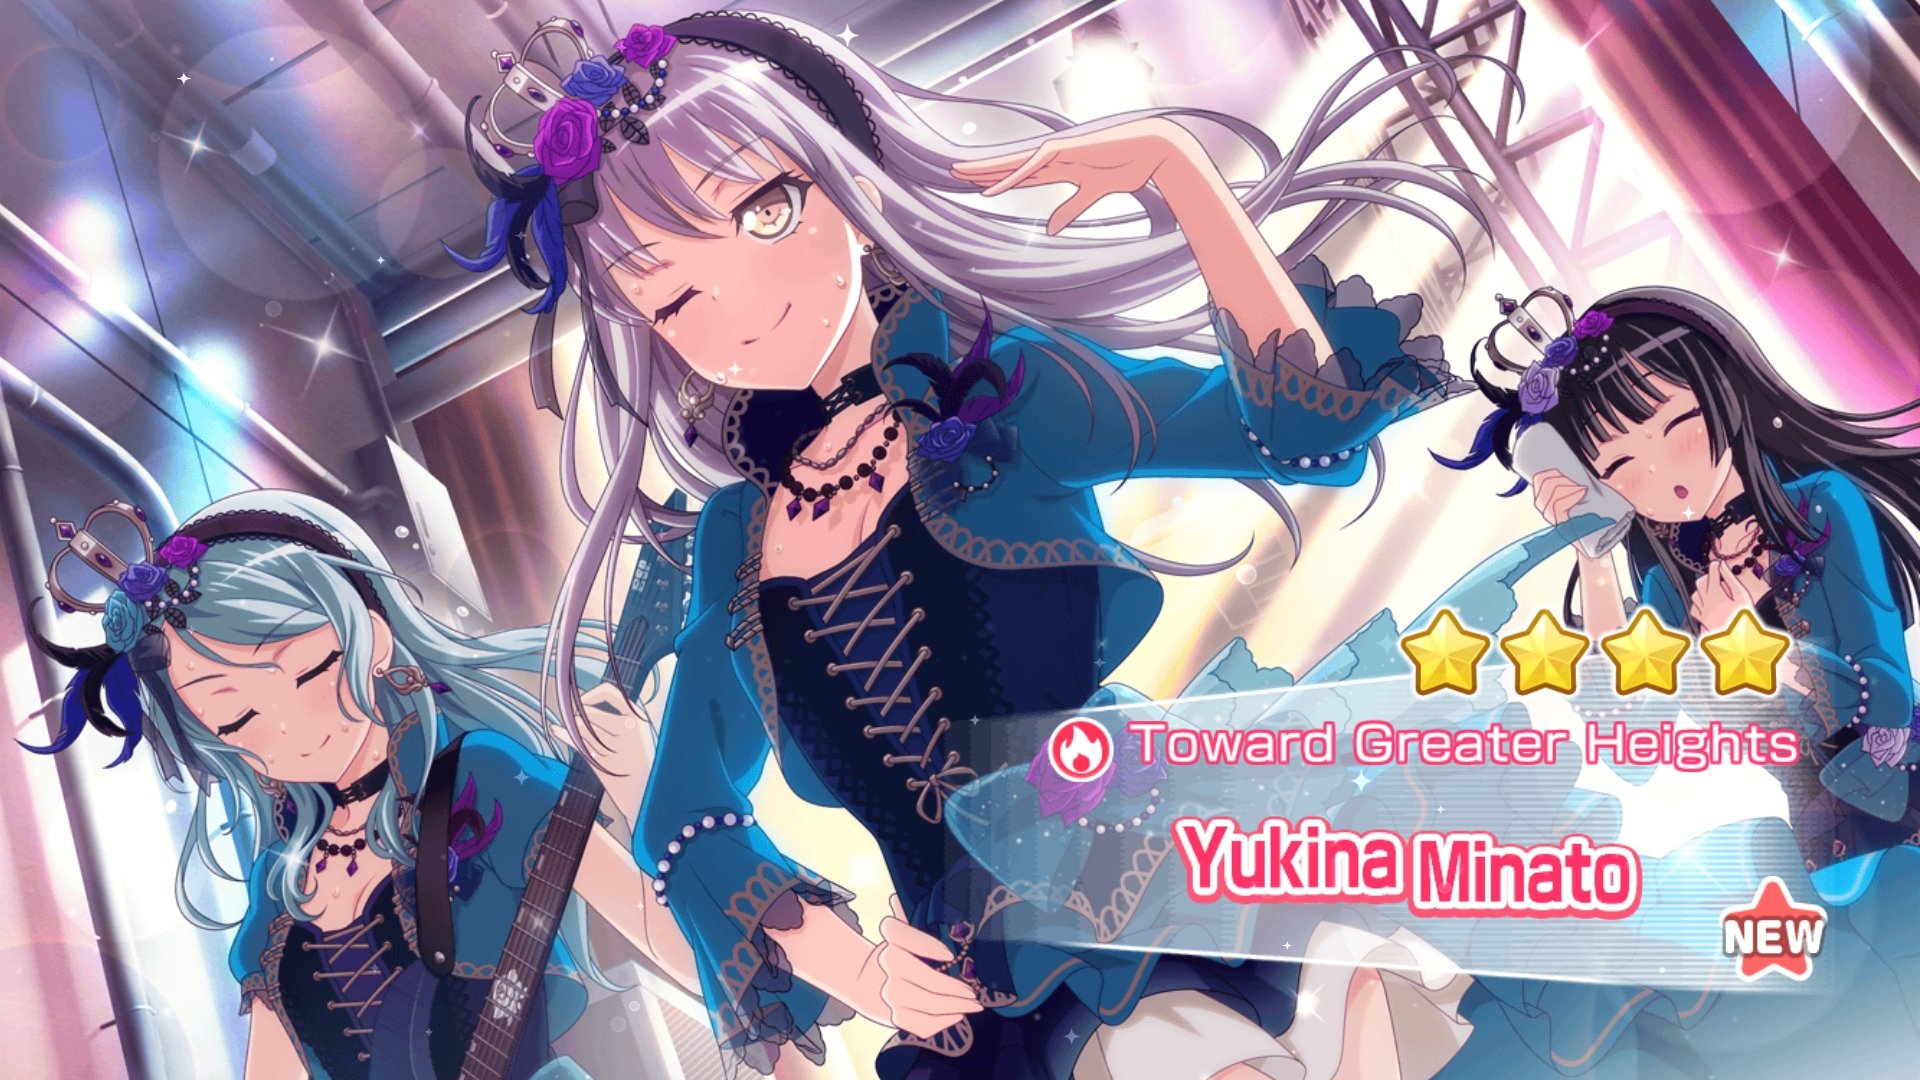 Marikacrystal16 I Scouted In The Backstage Pass Gacha On Bang Dream And I Got The New Yukina Thank You For Coming Home Yukina Now I Can Save Some Stars For